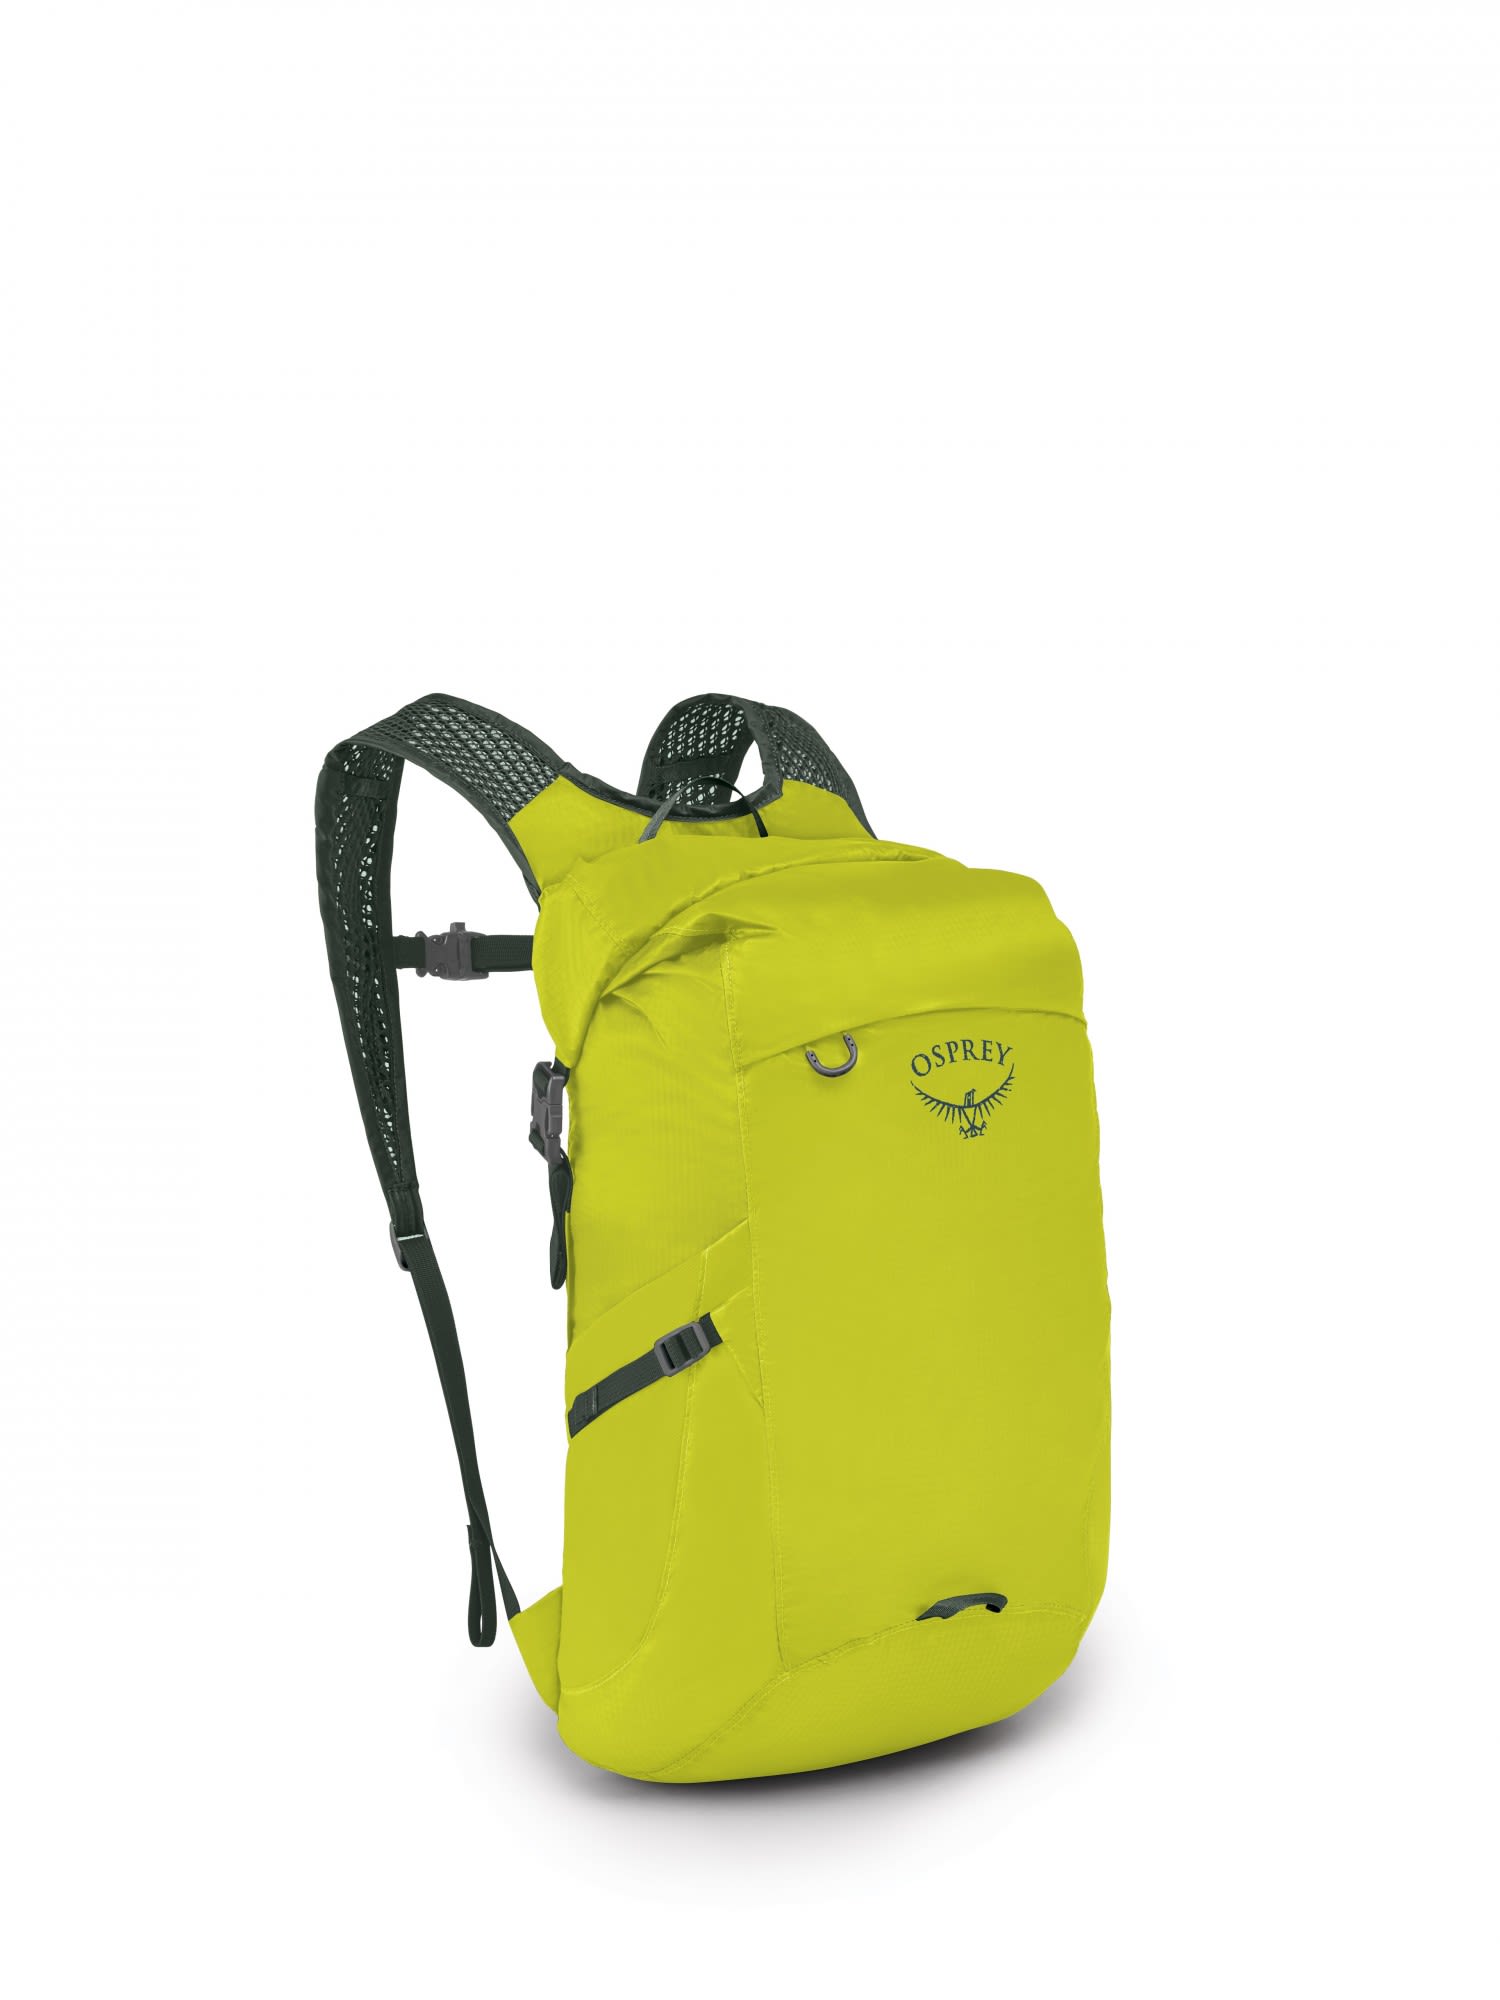 Osprey UL Dry Stuff Pack 20 Gelb- Daypacks- Grsse 20l - Farbe Electric Lime